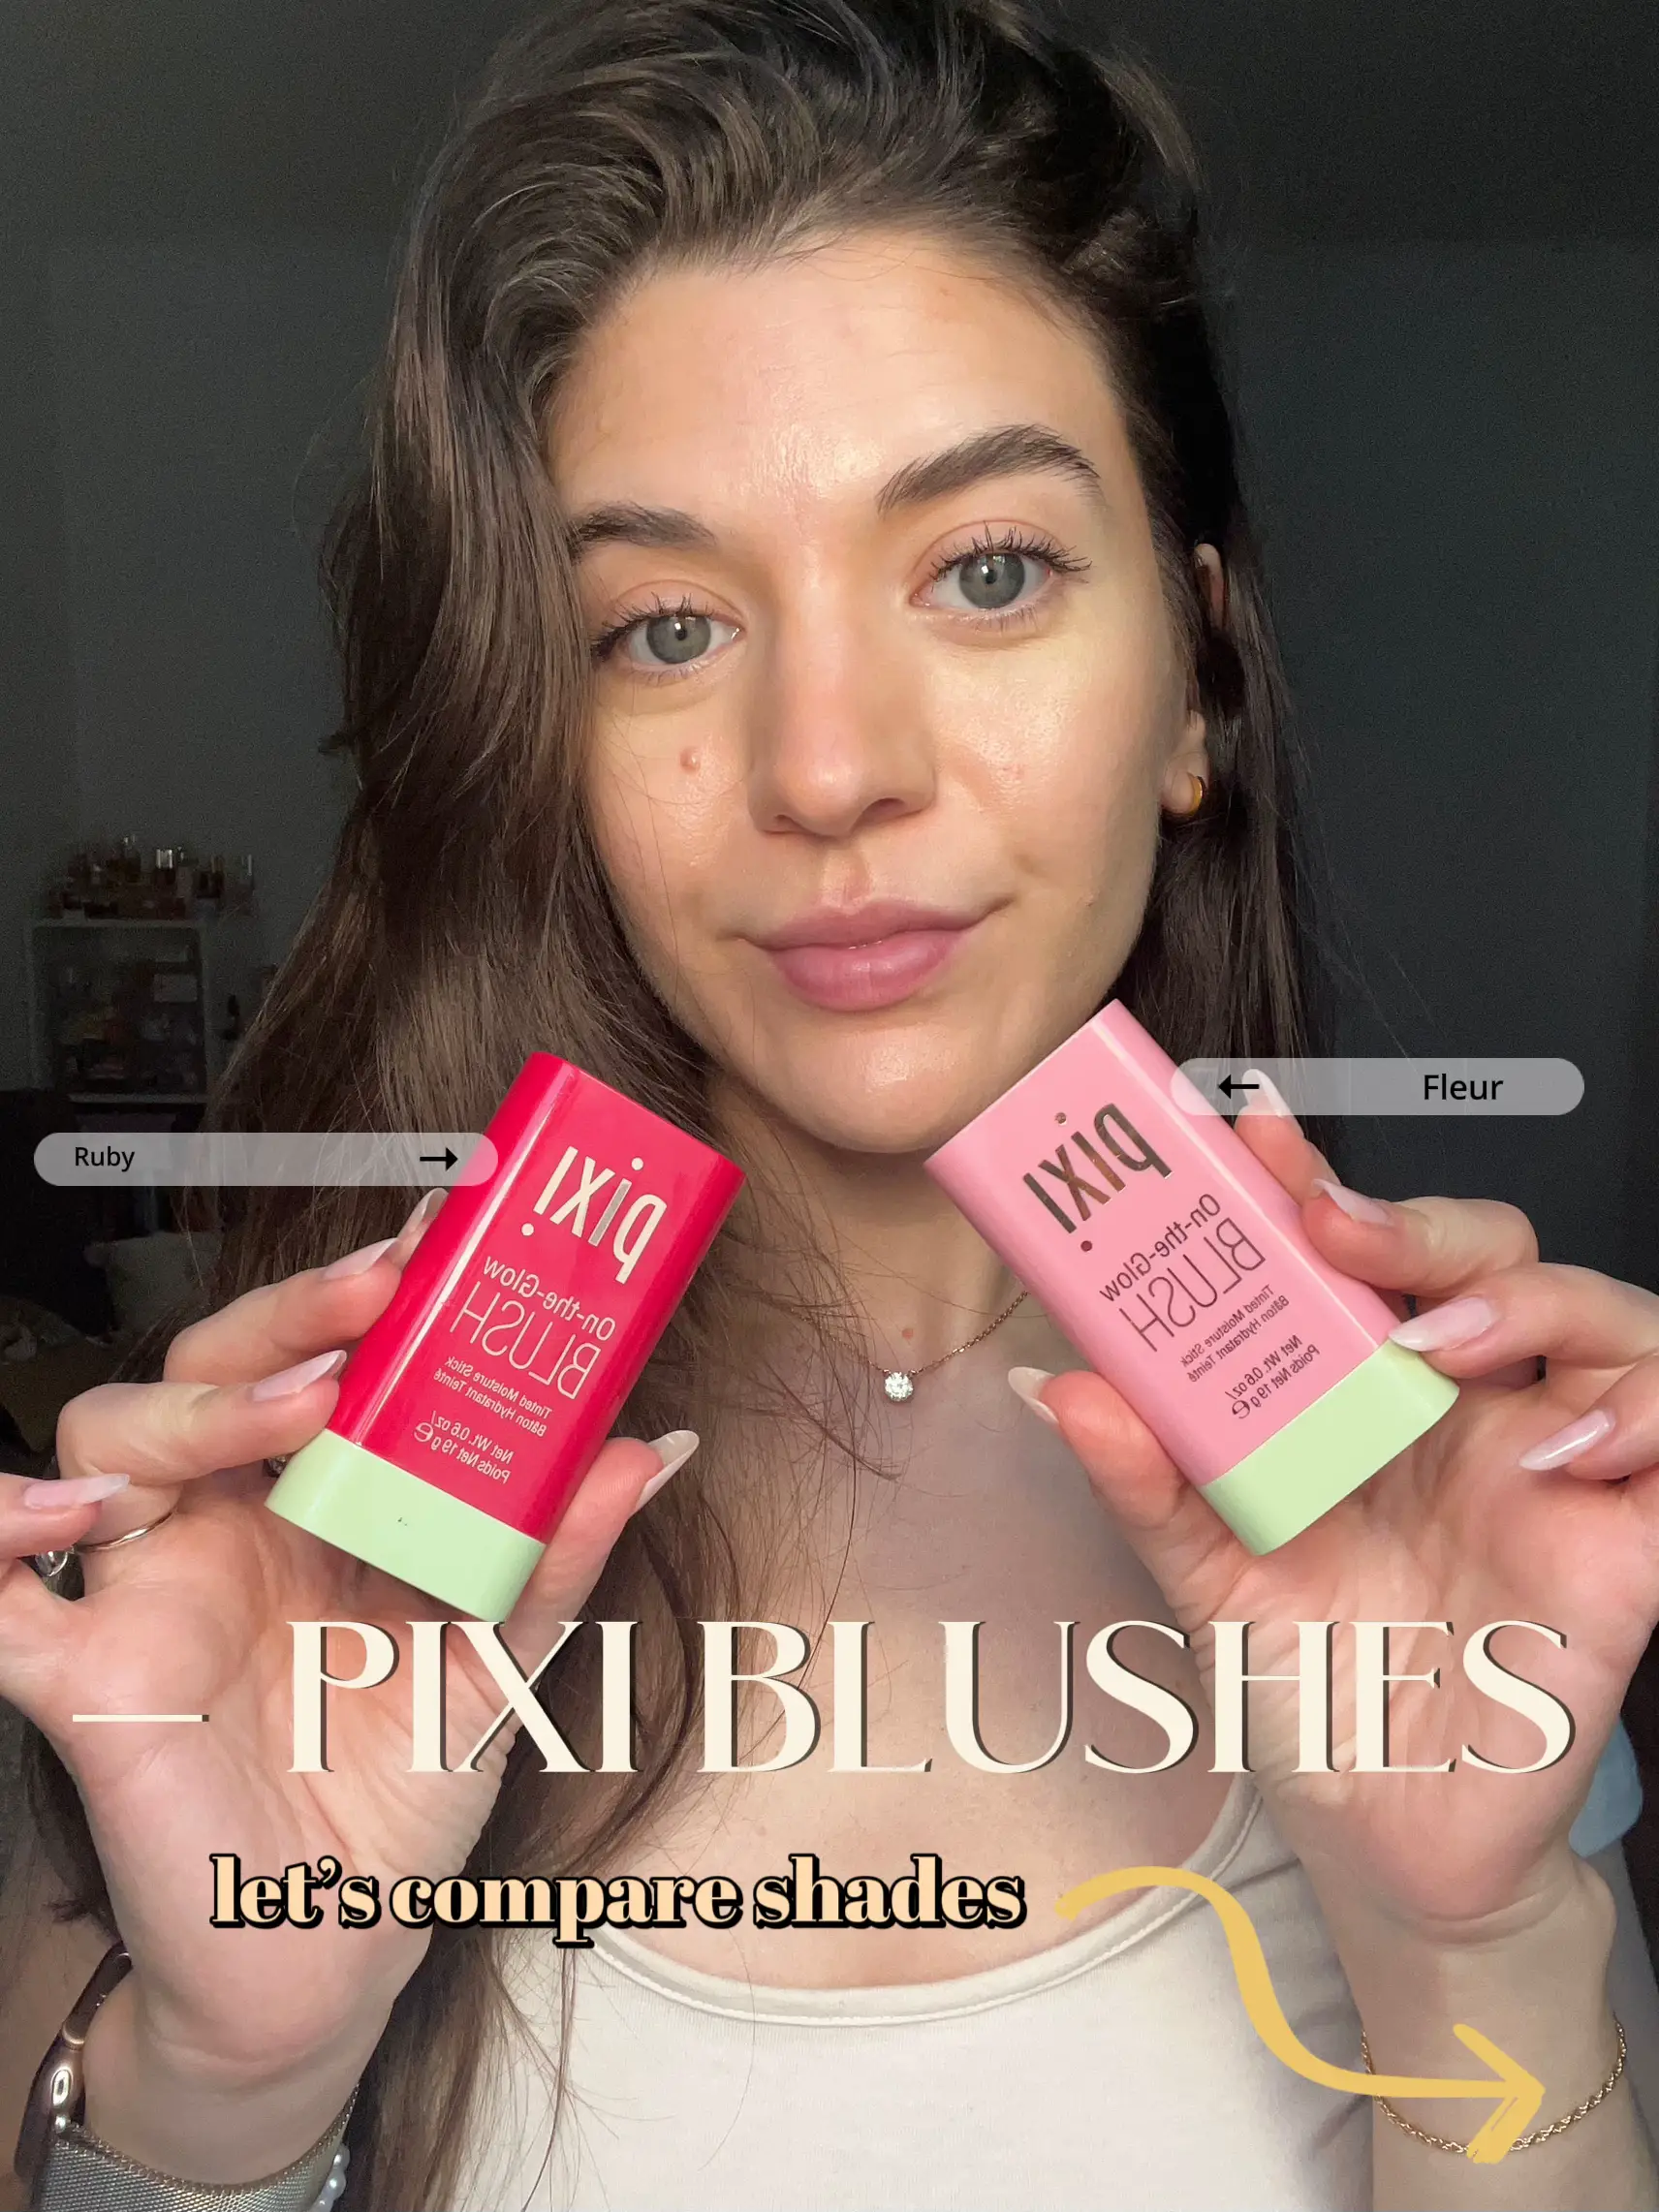 Can anyone recommend products with similar tone/color to Pixi